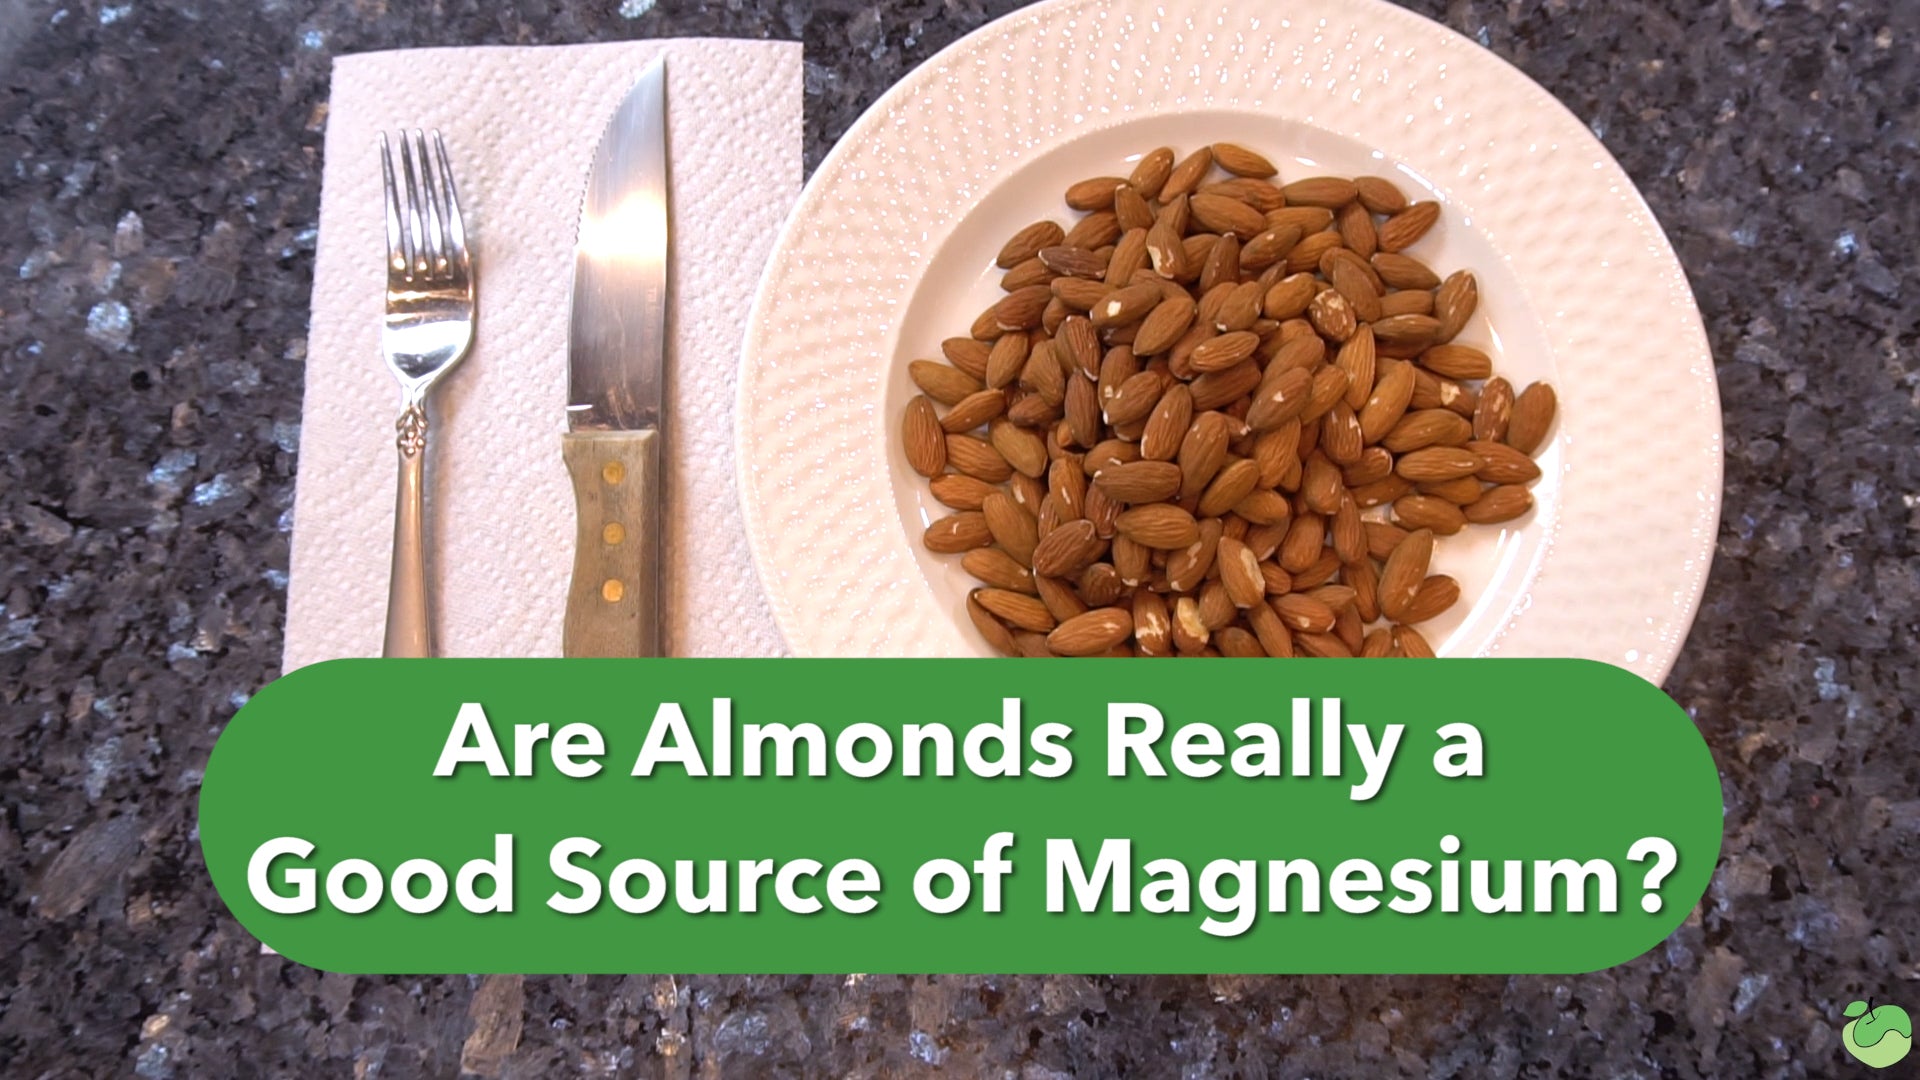 Are Almonds REALLY a Good Source of Magnesium?